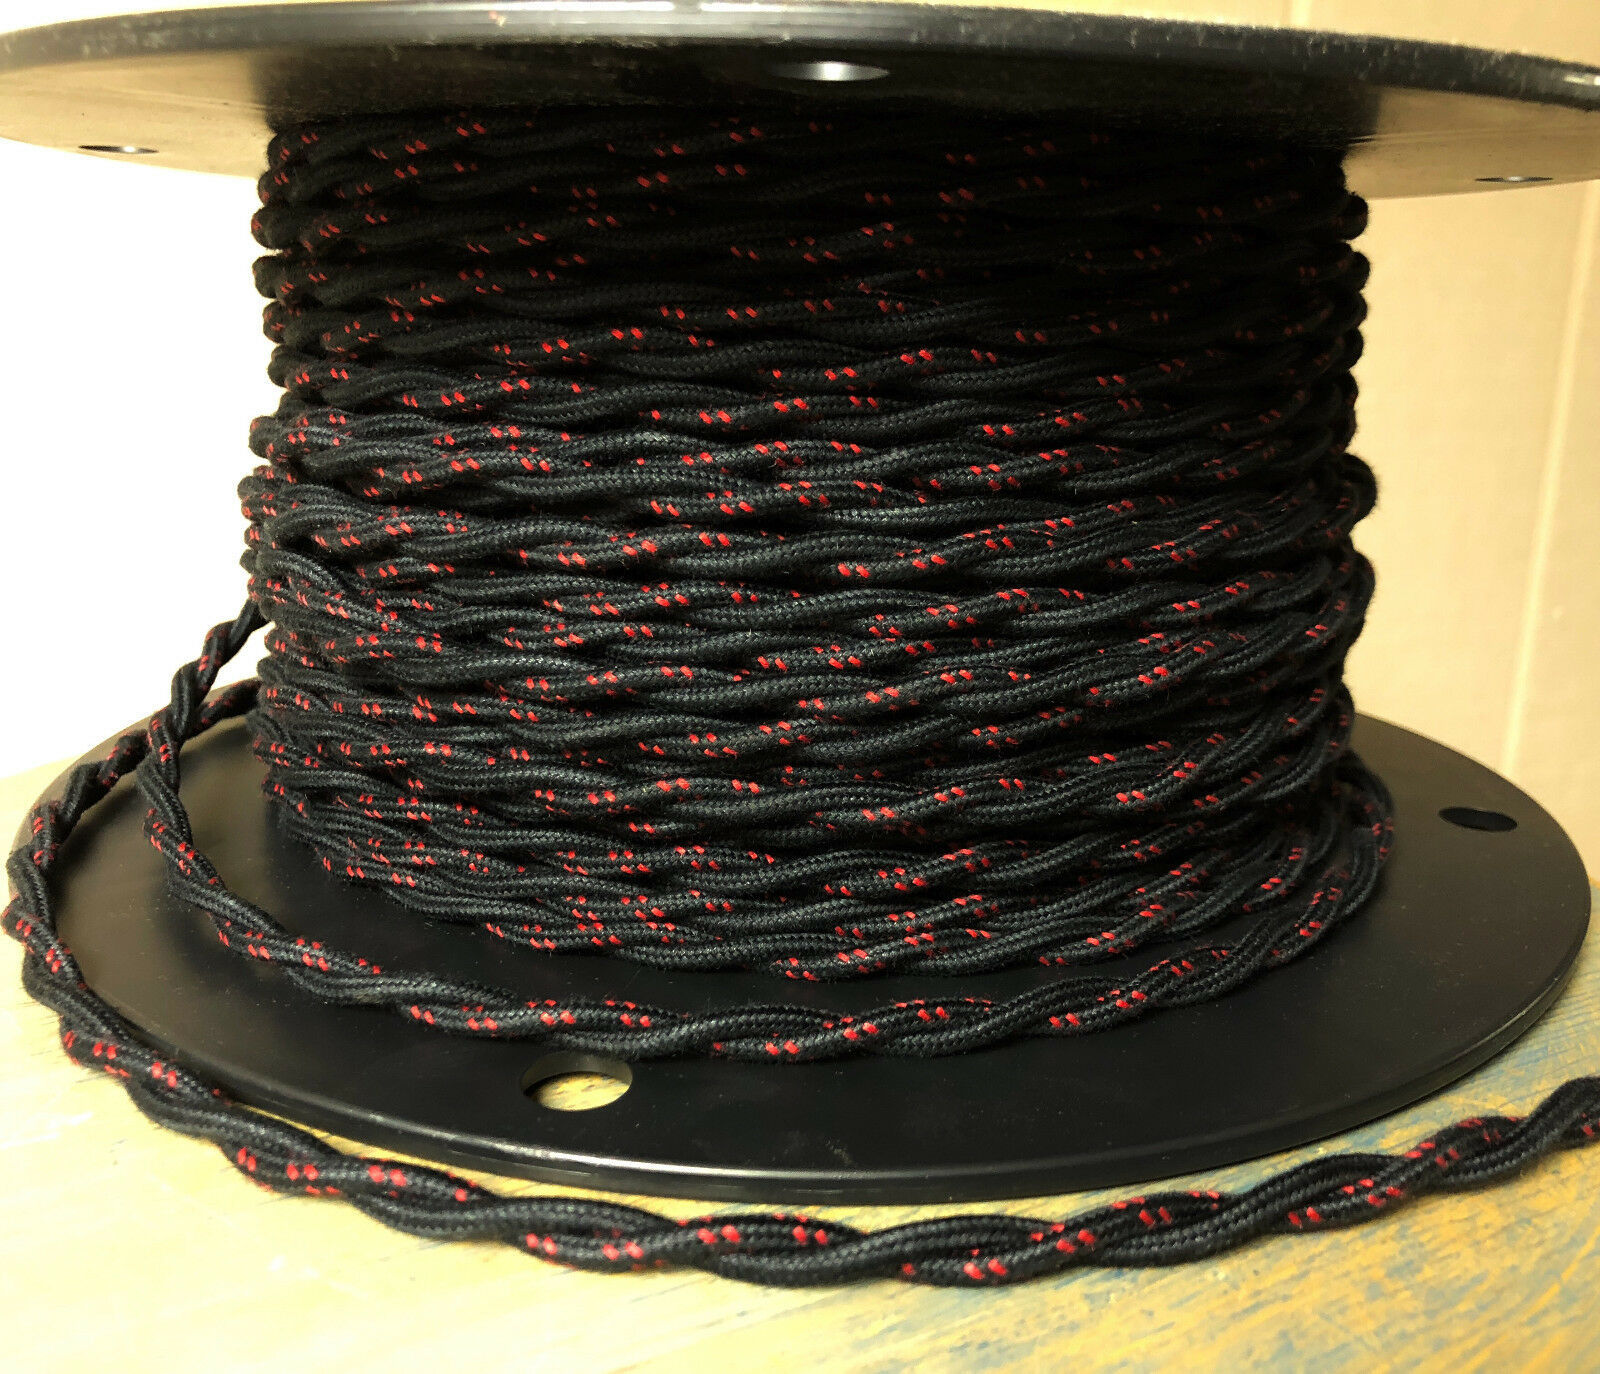 Primary image for Cloth Covered Twisted Wire - Black w/ Red Tracer, Vintage Style Fabric Lamp Cord